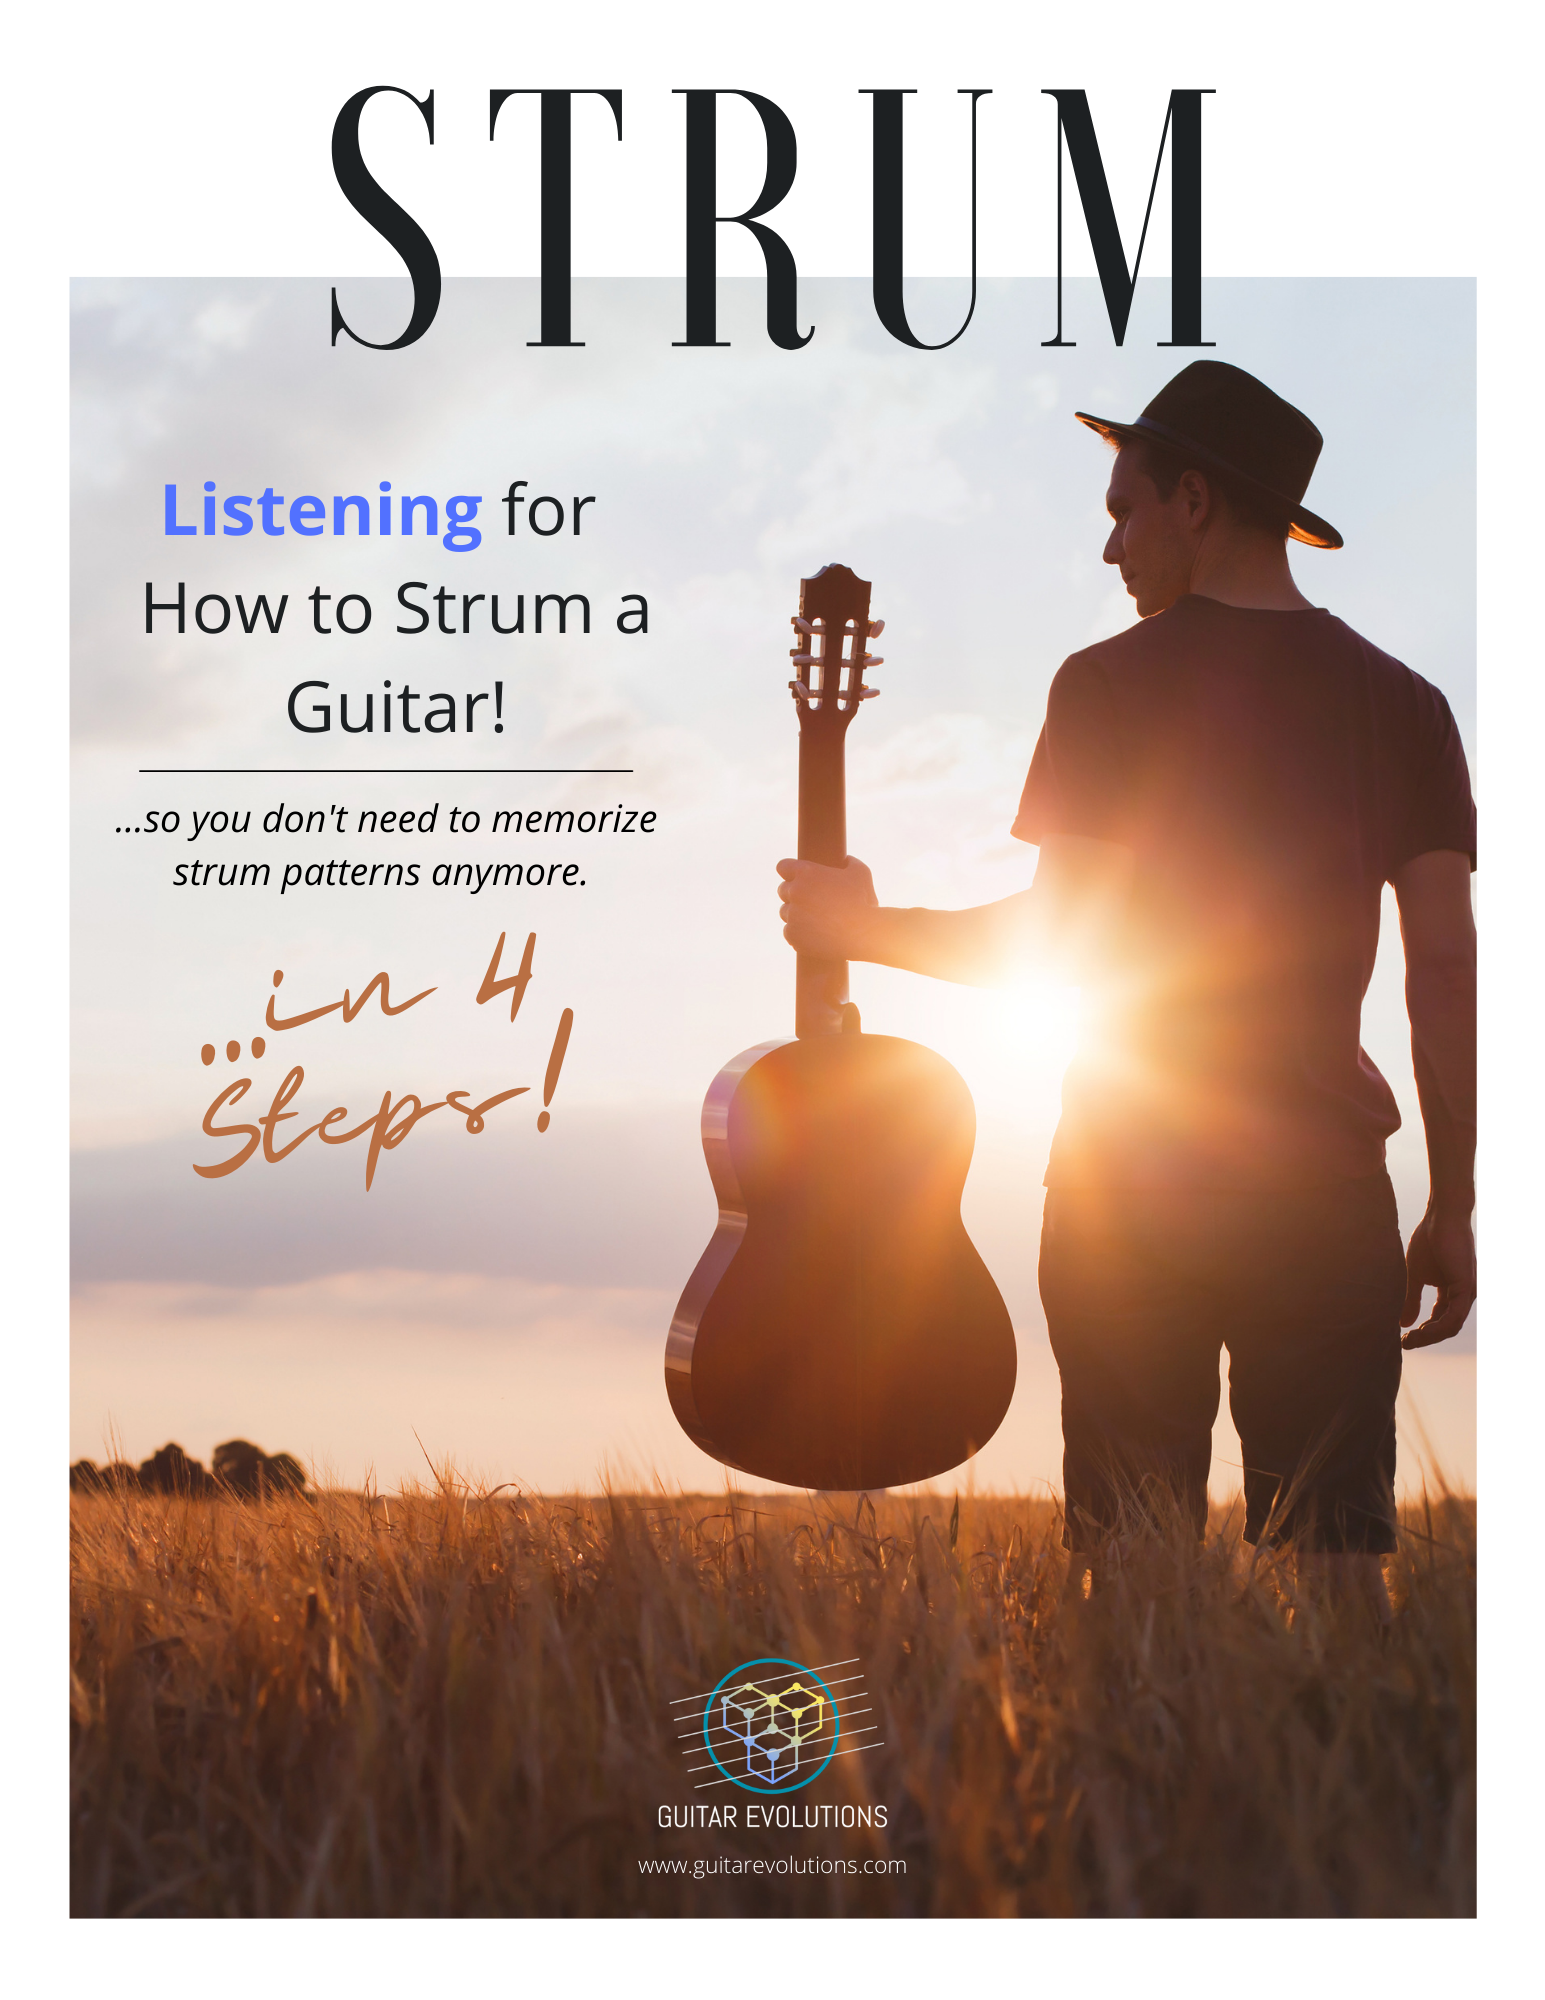 Learn to strum